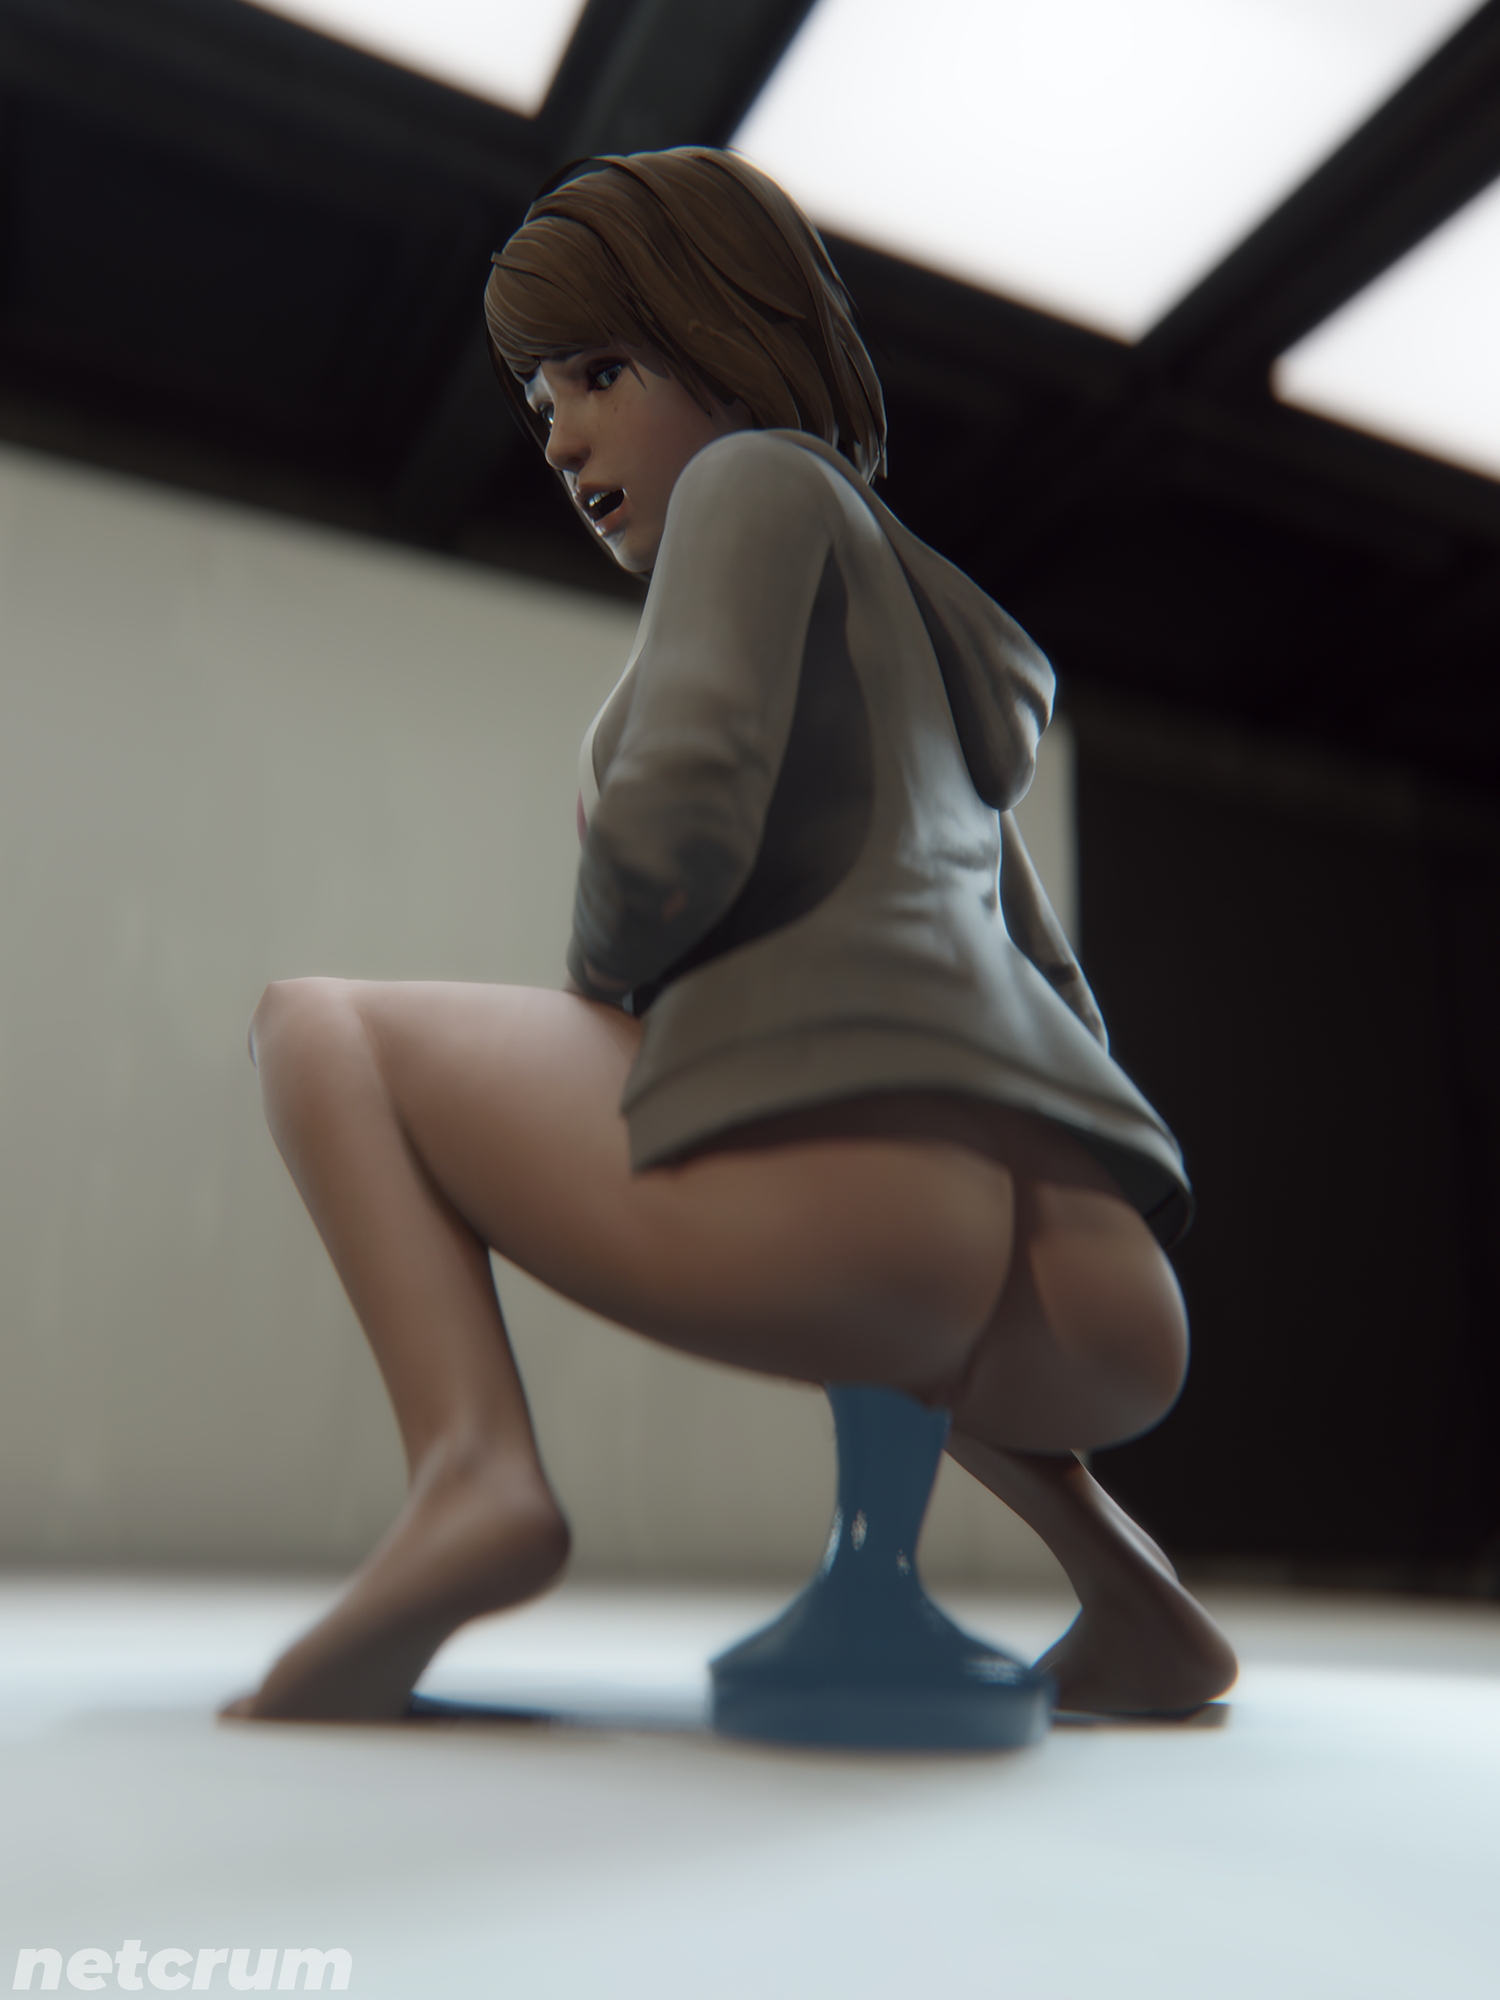 Max does a photoshoot Max Caulfield Life Is Strange Blender3d Blendernsfw 3d Porn Dildo Squatting Small Ass Feet Nsfw From Behind